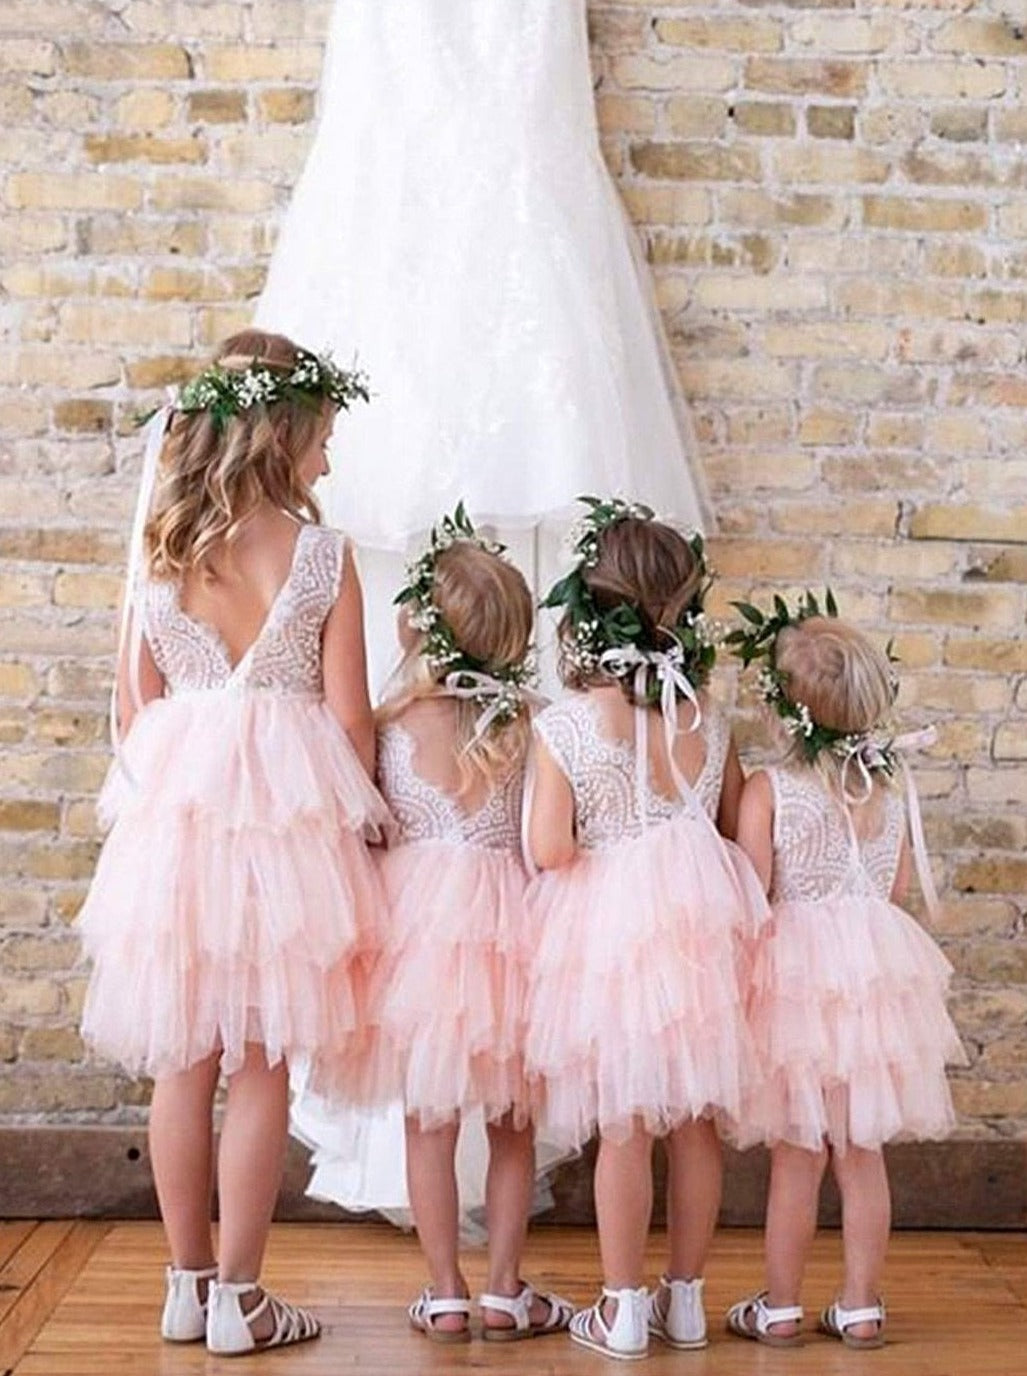 2 Bunnies Peony Lace Flower Girl Dress in Pink Sleeveless Knee-Length Tiered Tulle A-Line V-Back Scoop 6